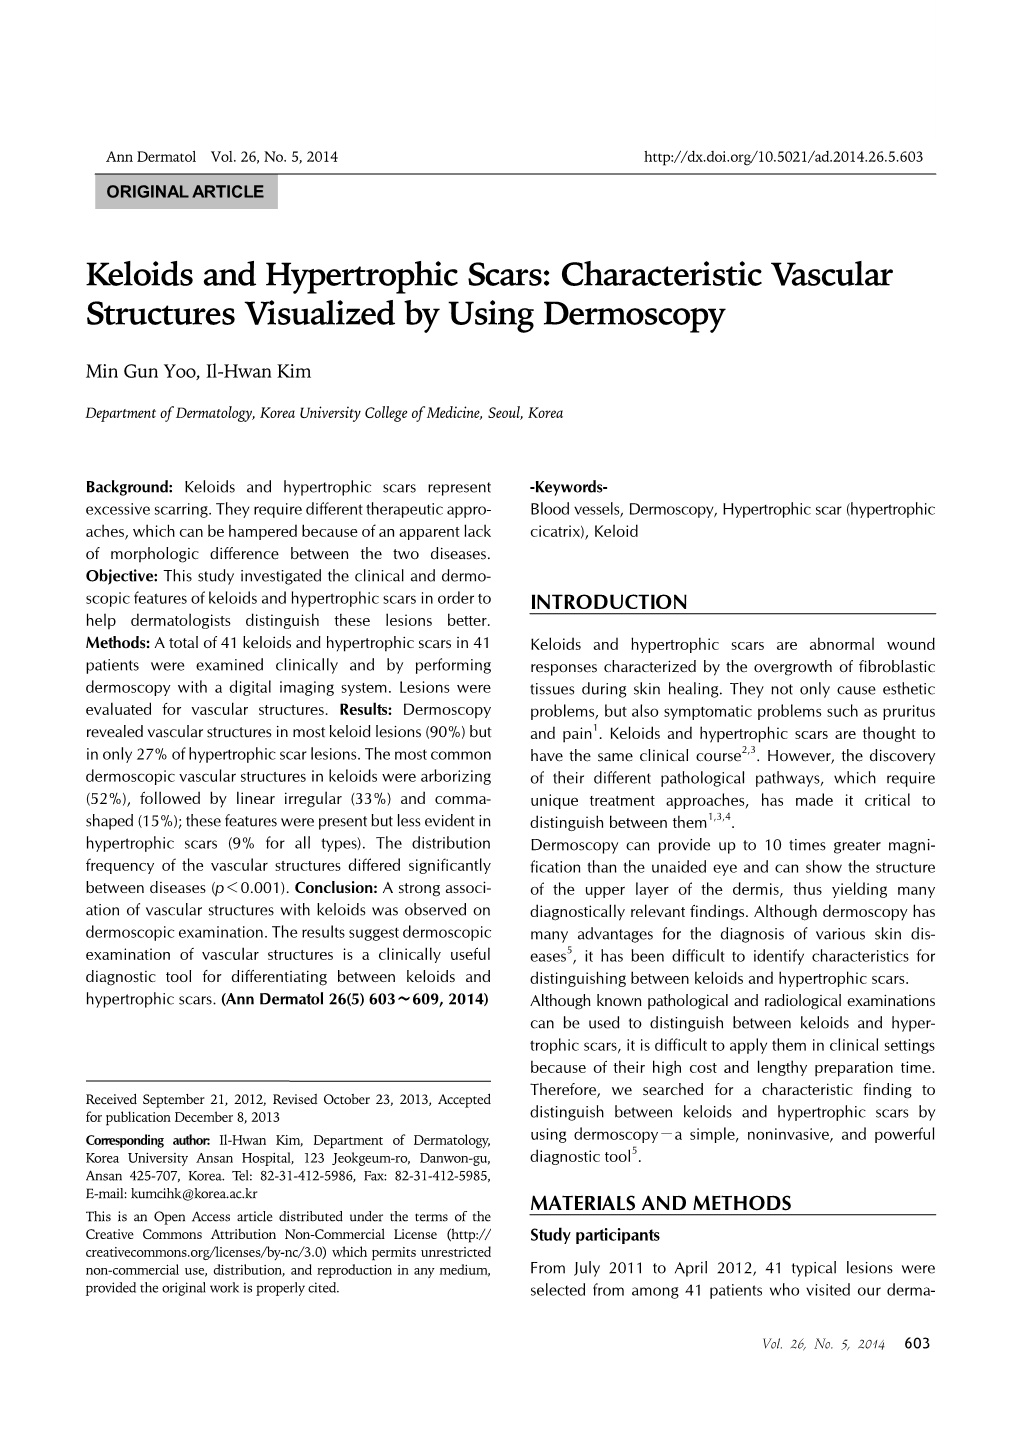 Keloids and Hypertrophic Scars: Characteristic Vascular Structures Visualized by Using Dermoscopy